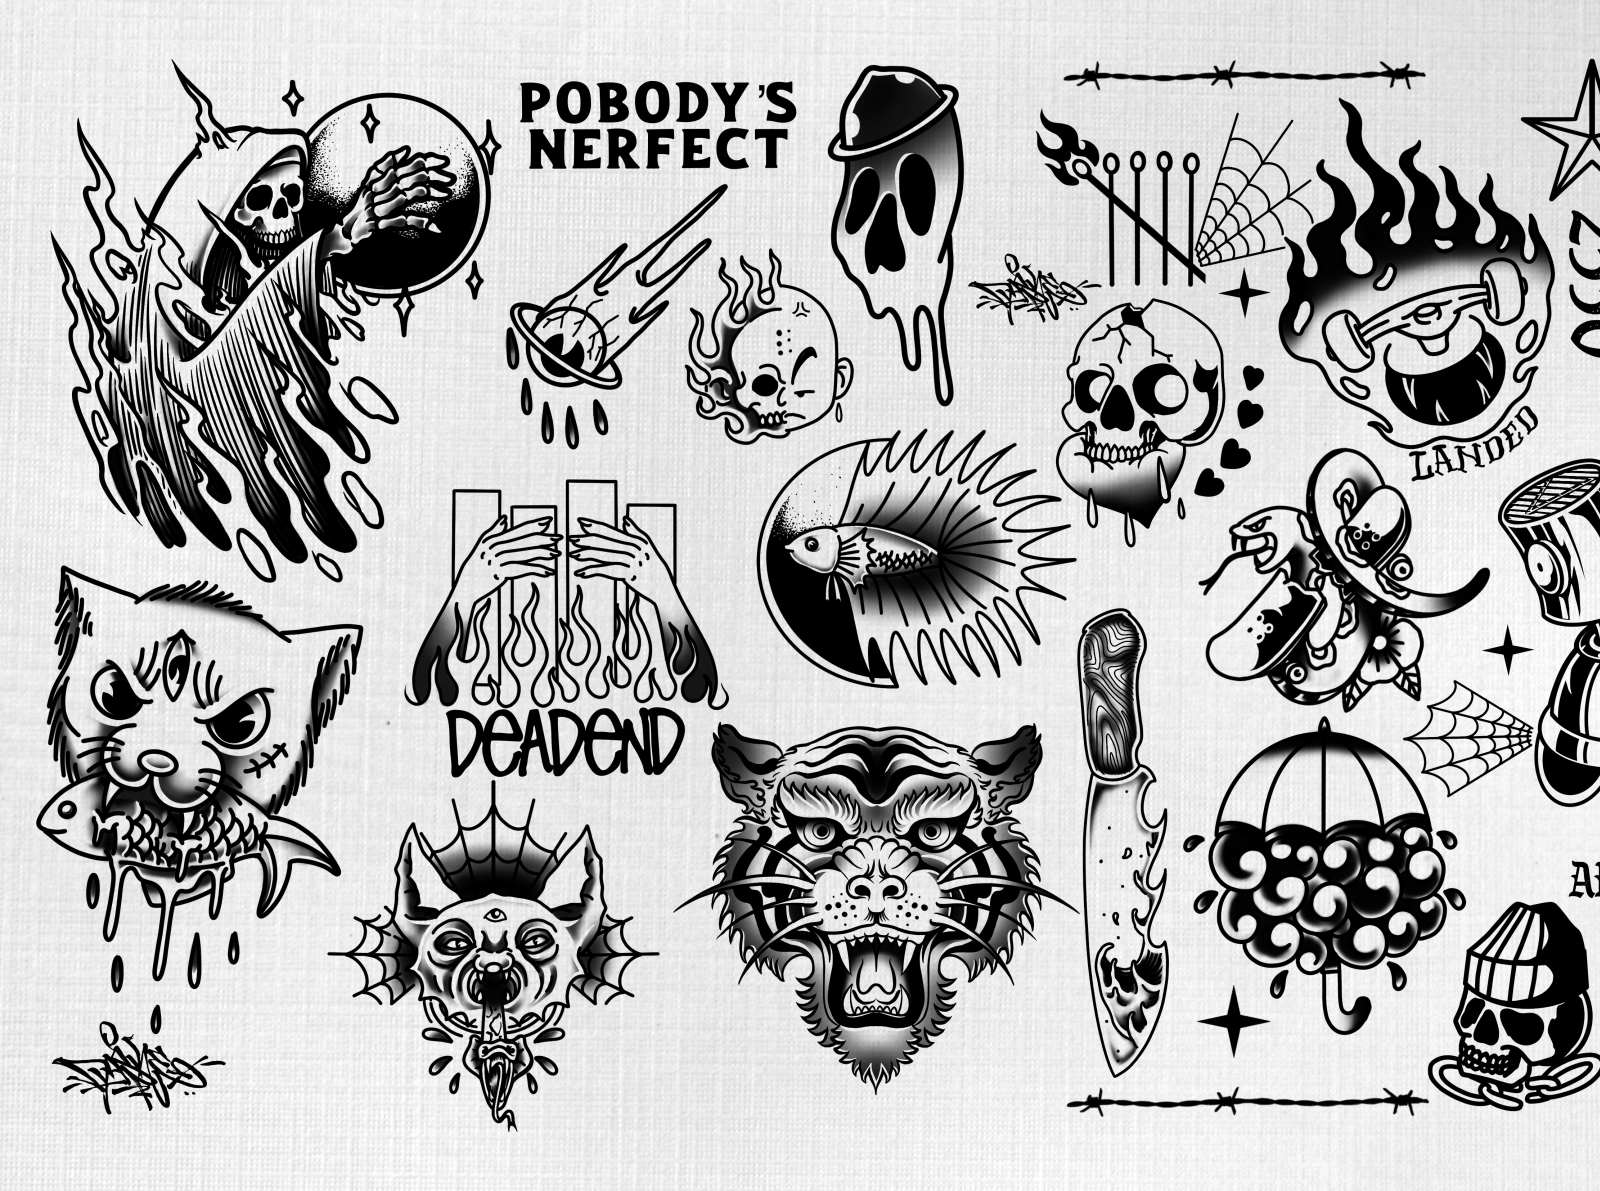 tattoo flash pobody's nerfect by fakie revert on Dribbble